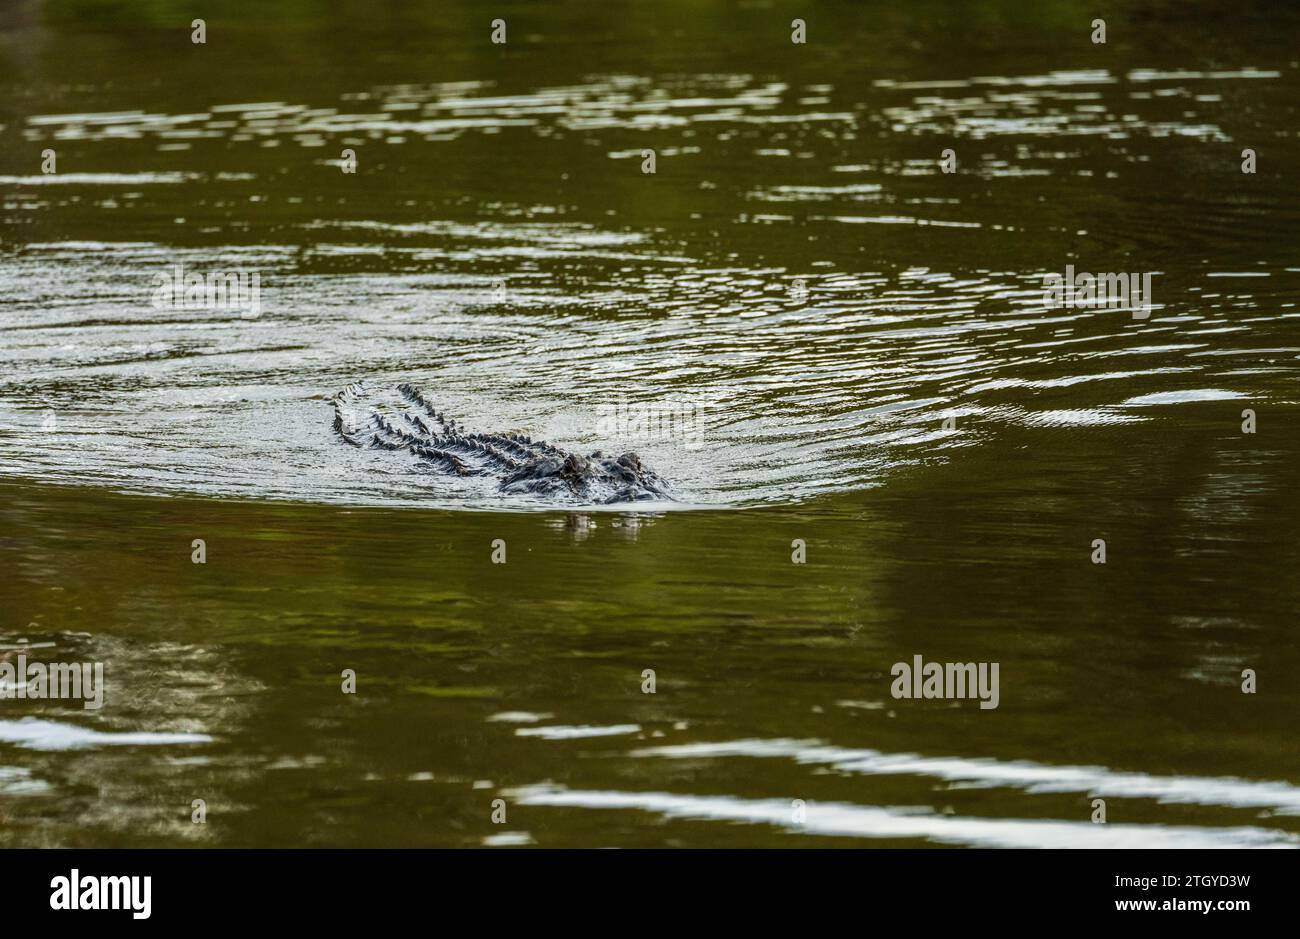 American alligator approaching across calm waters of Atchafalaya delta with eyes and snout visible in ripples Stock Photo